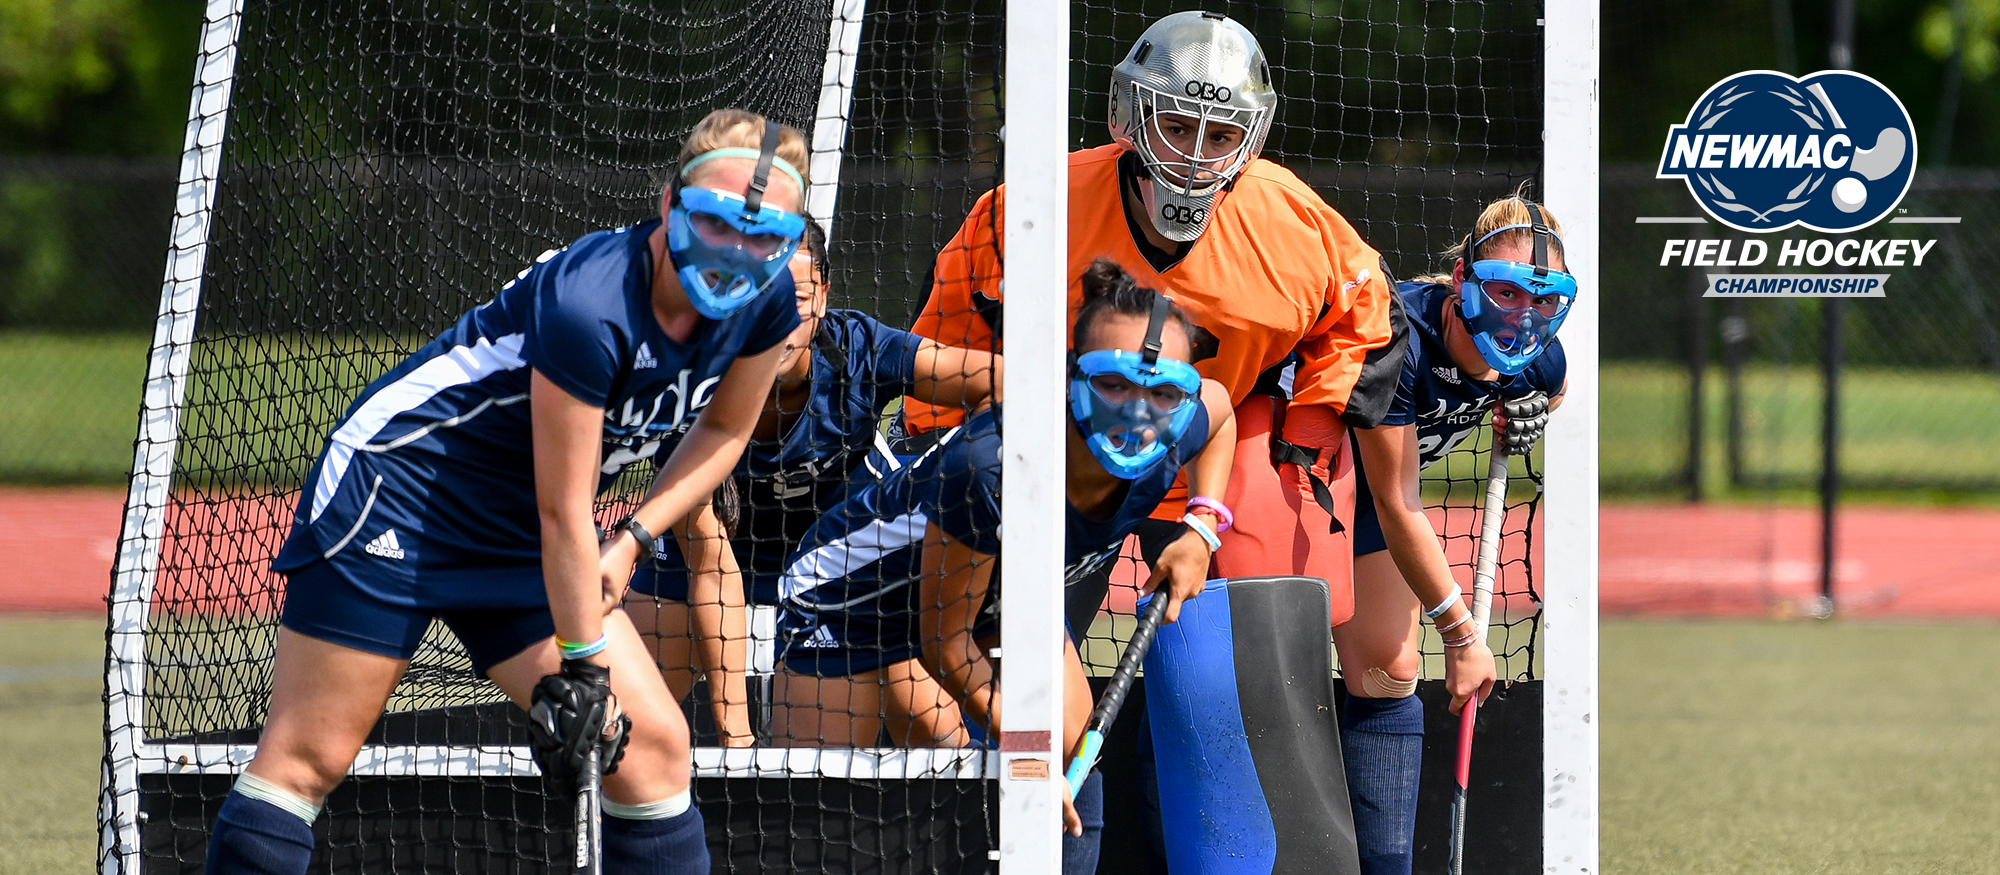 No. 6 Field Hockey Travels to No. 3 WPI for NEWMAC Championship Tournament First Round